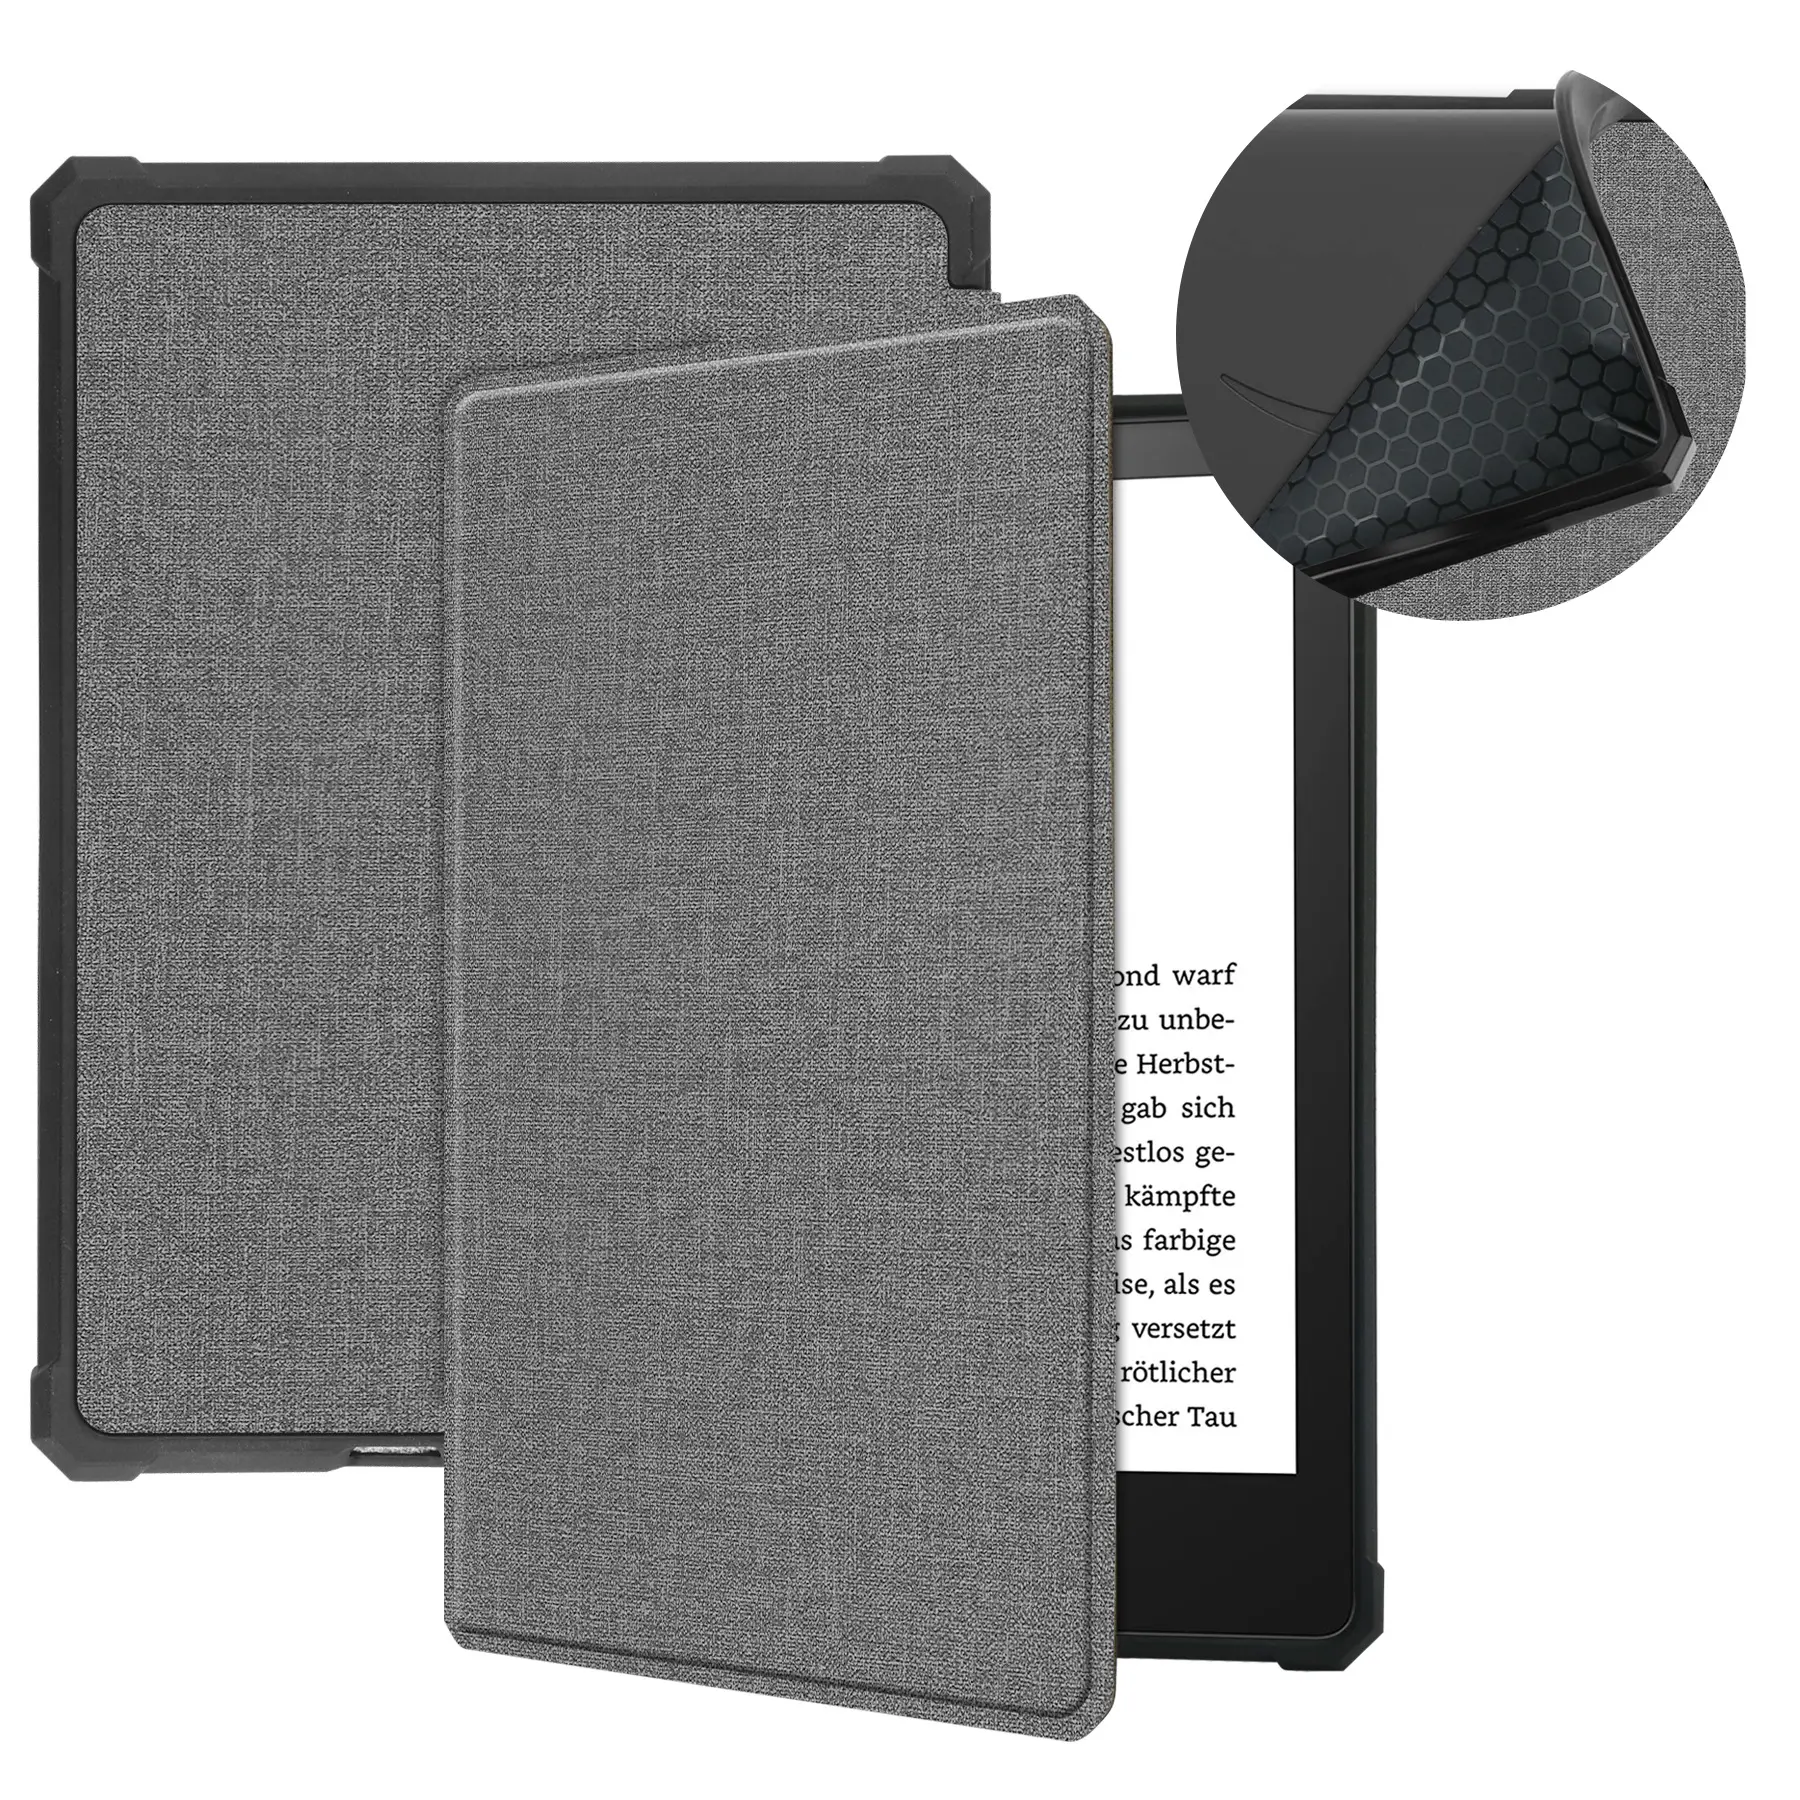 Hot sale for Amazon kindle Paperwhite 11 Generation EBook Case 6.8 inch 2021 with aoto sleep/wake function